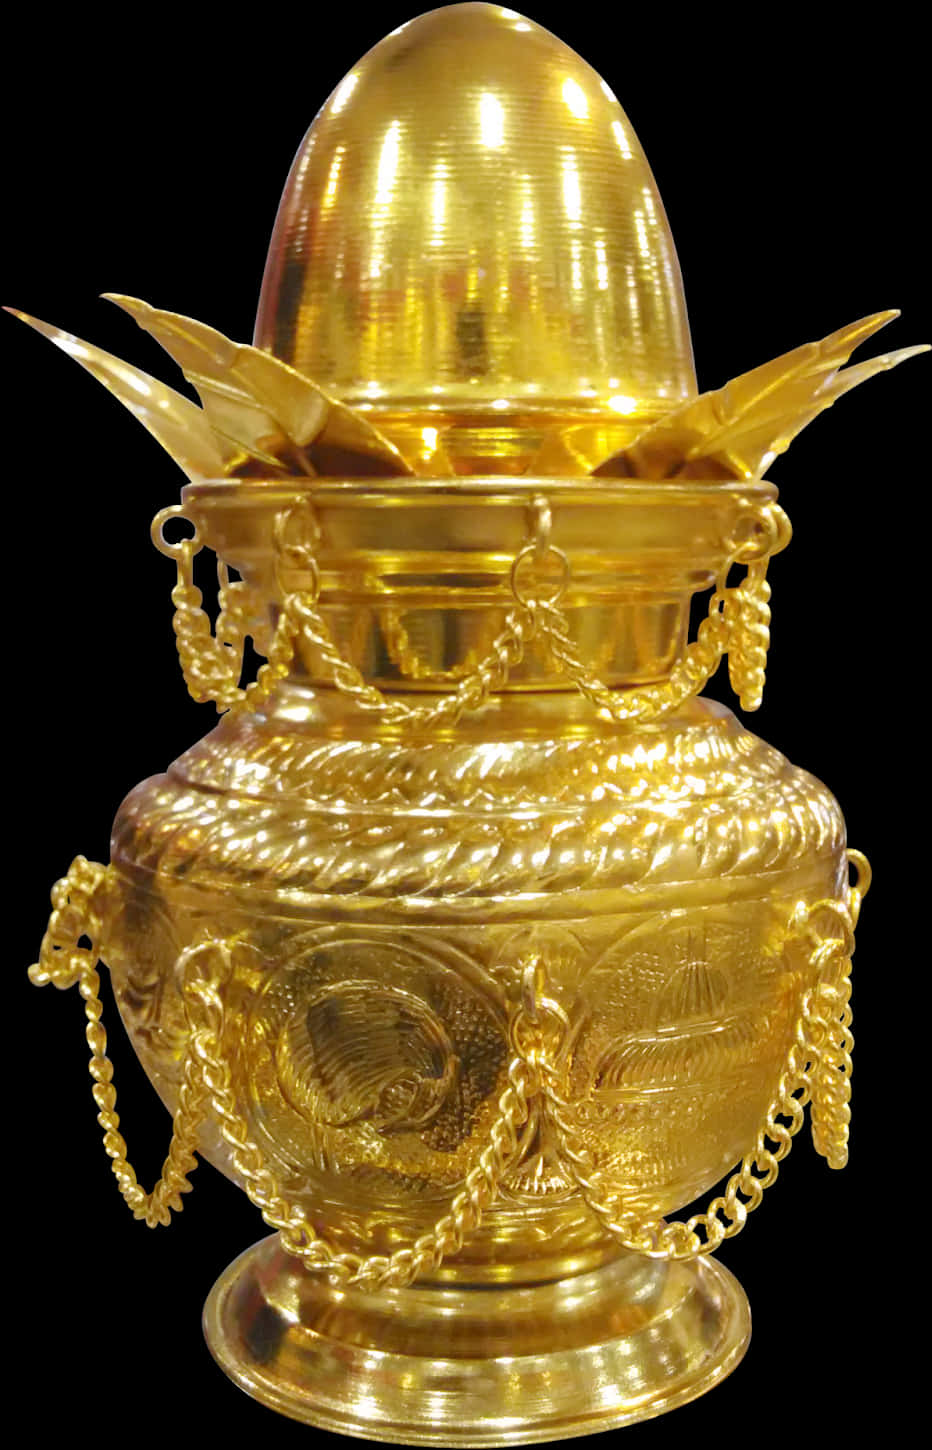 A Gold Pot With Chains